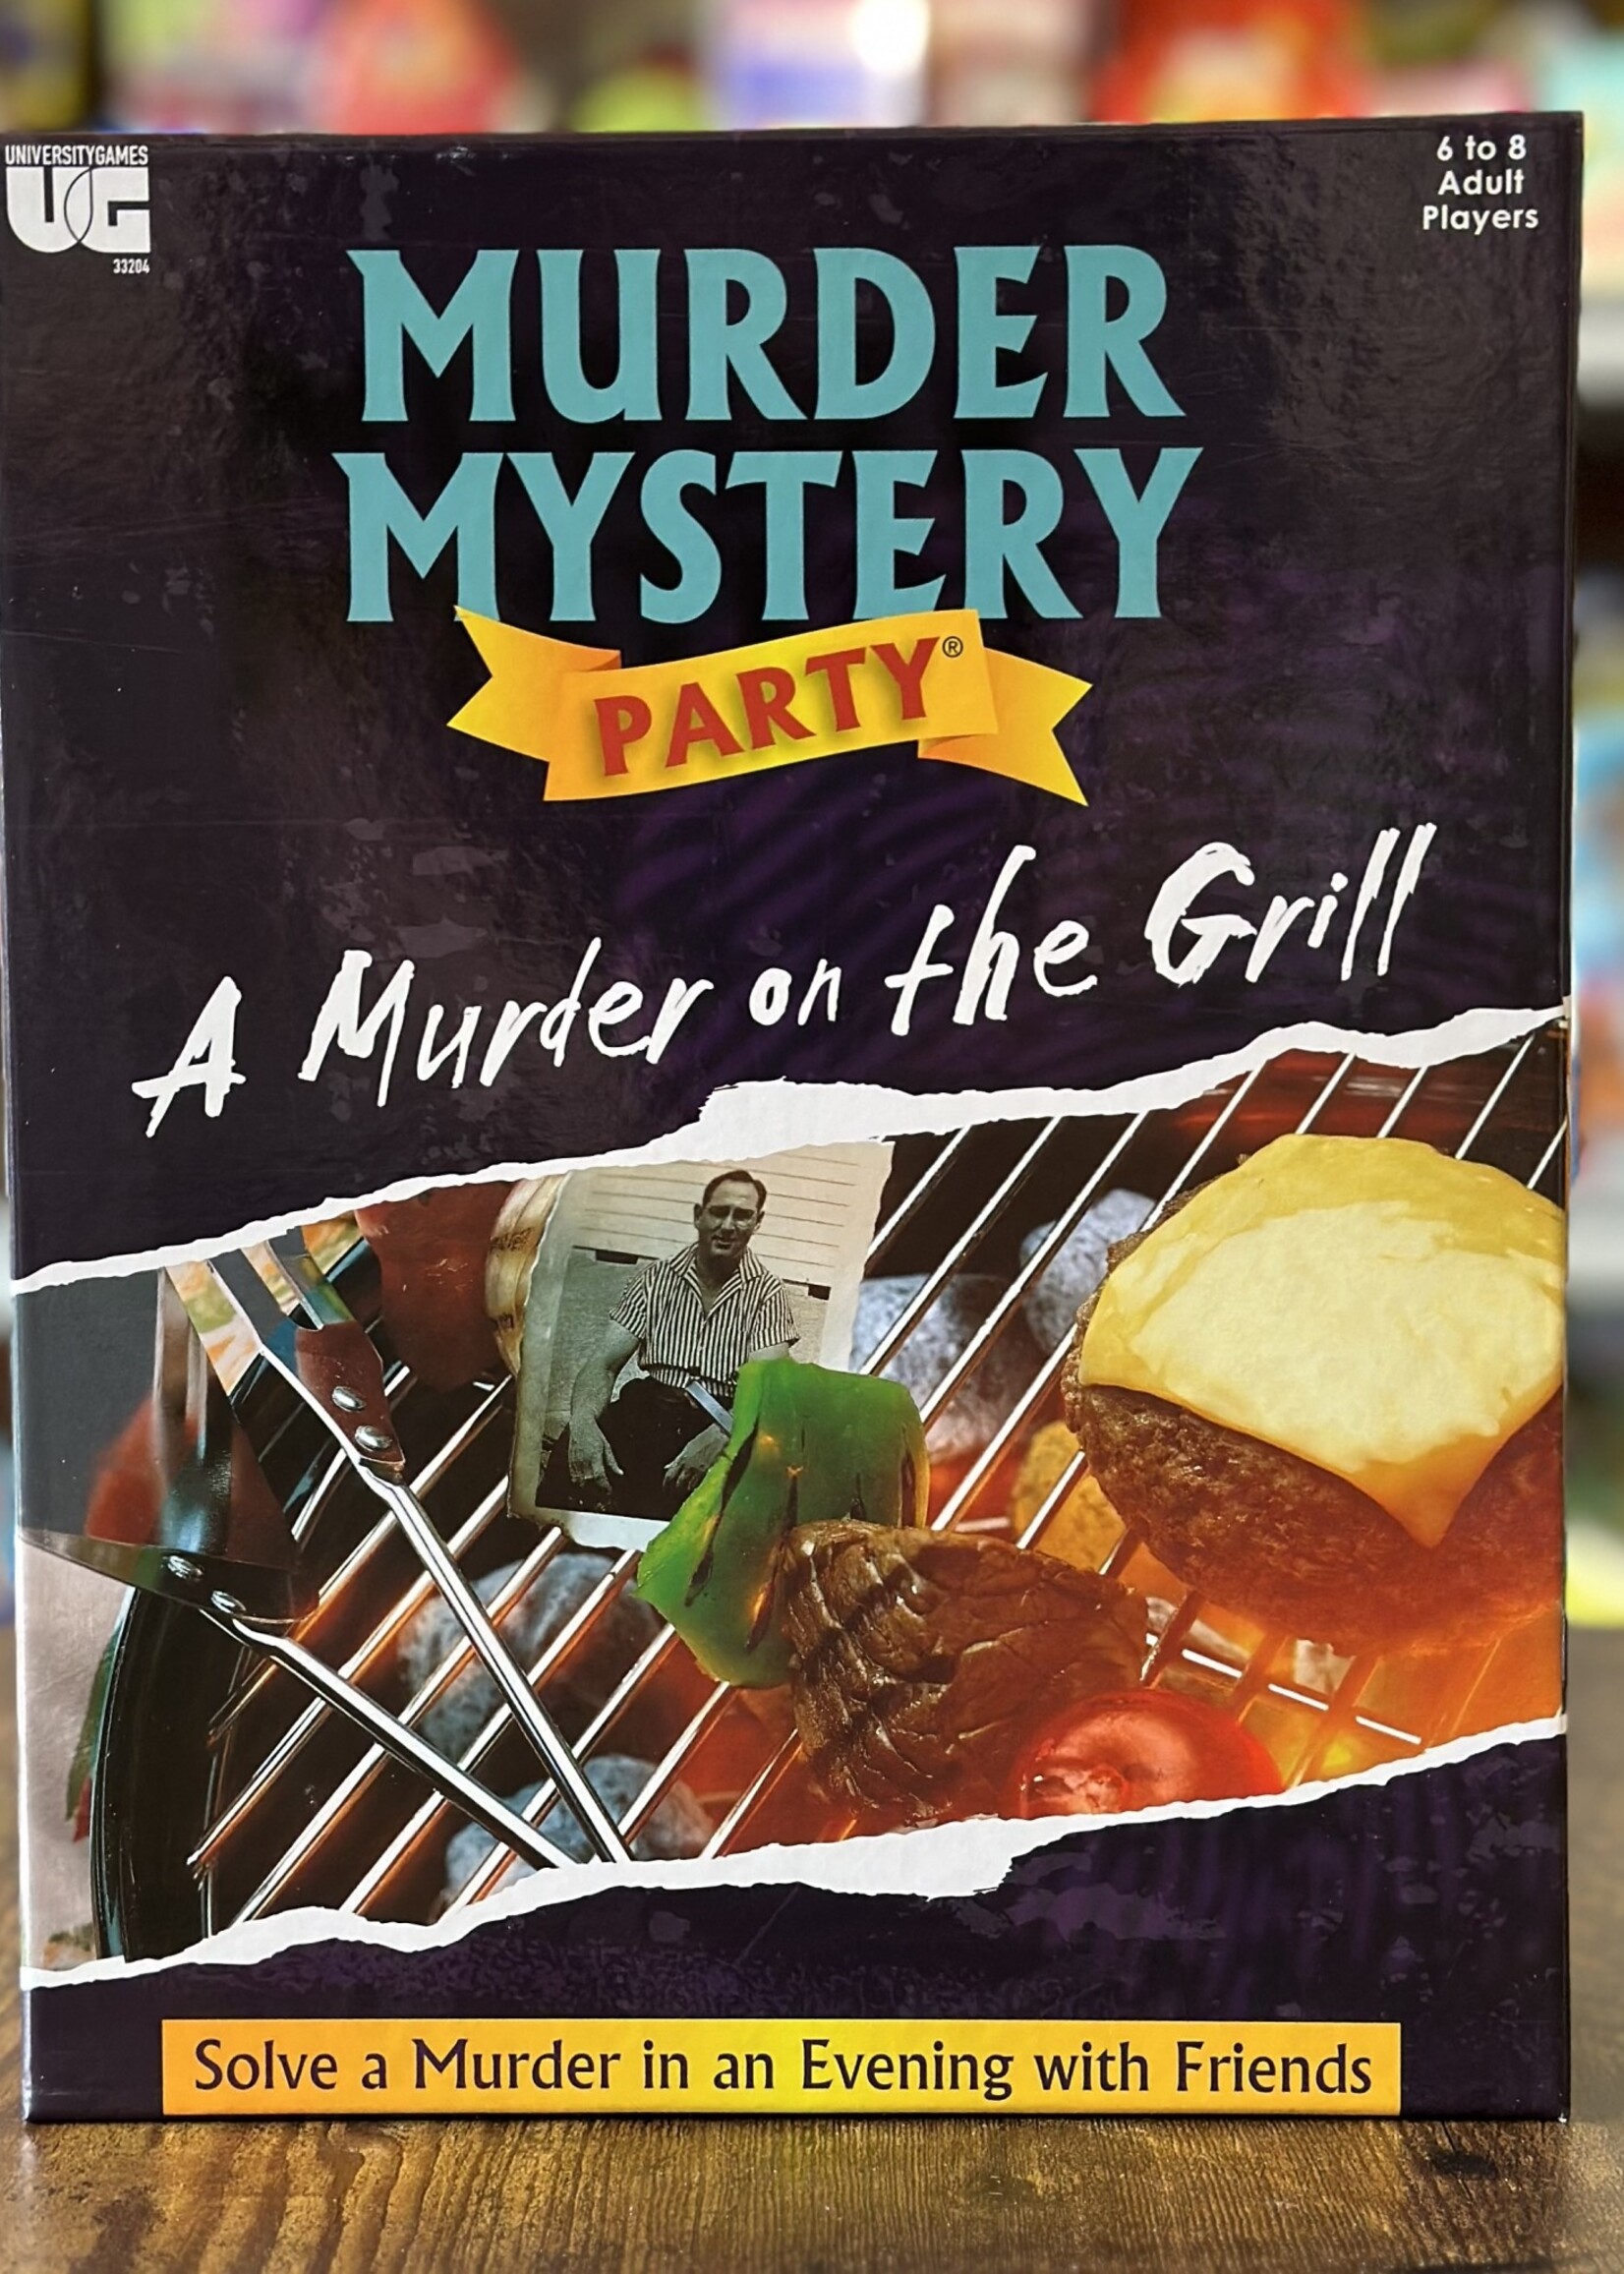 University Games A Murder on the Grill - Murder Mystery Party